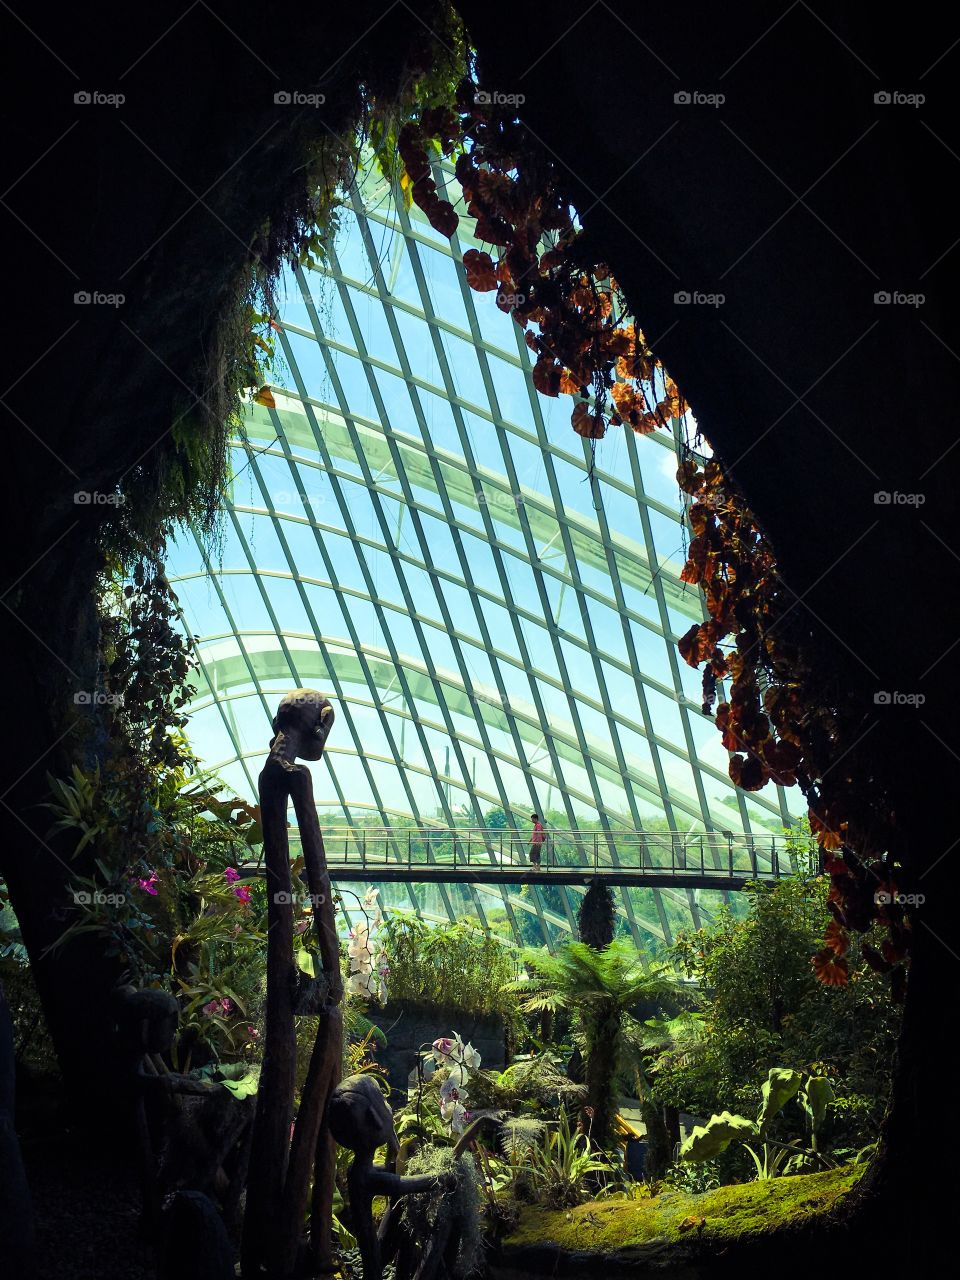 Picturesque. Gardens by the bay, Singapore.